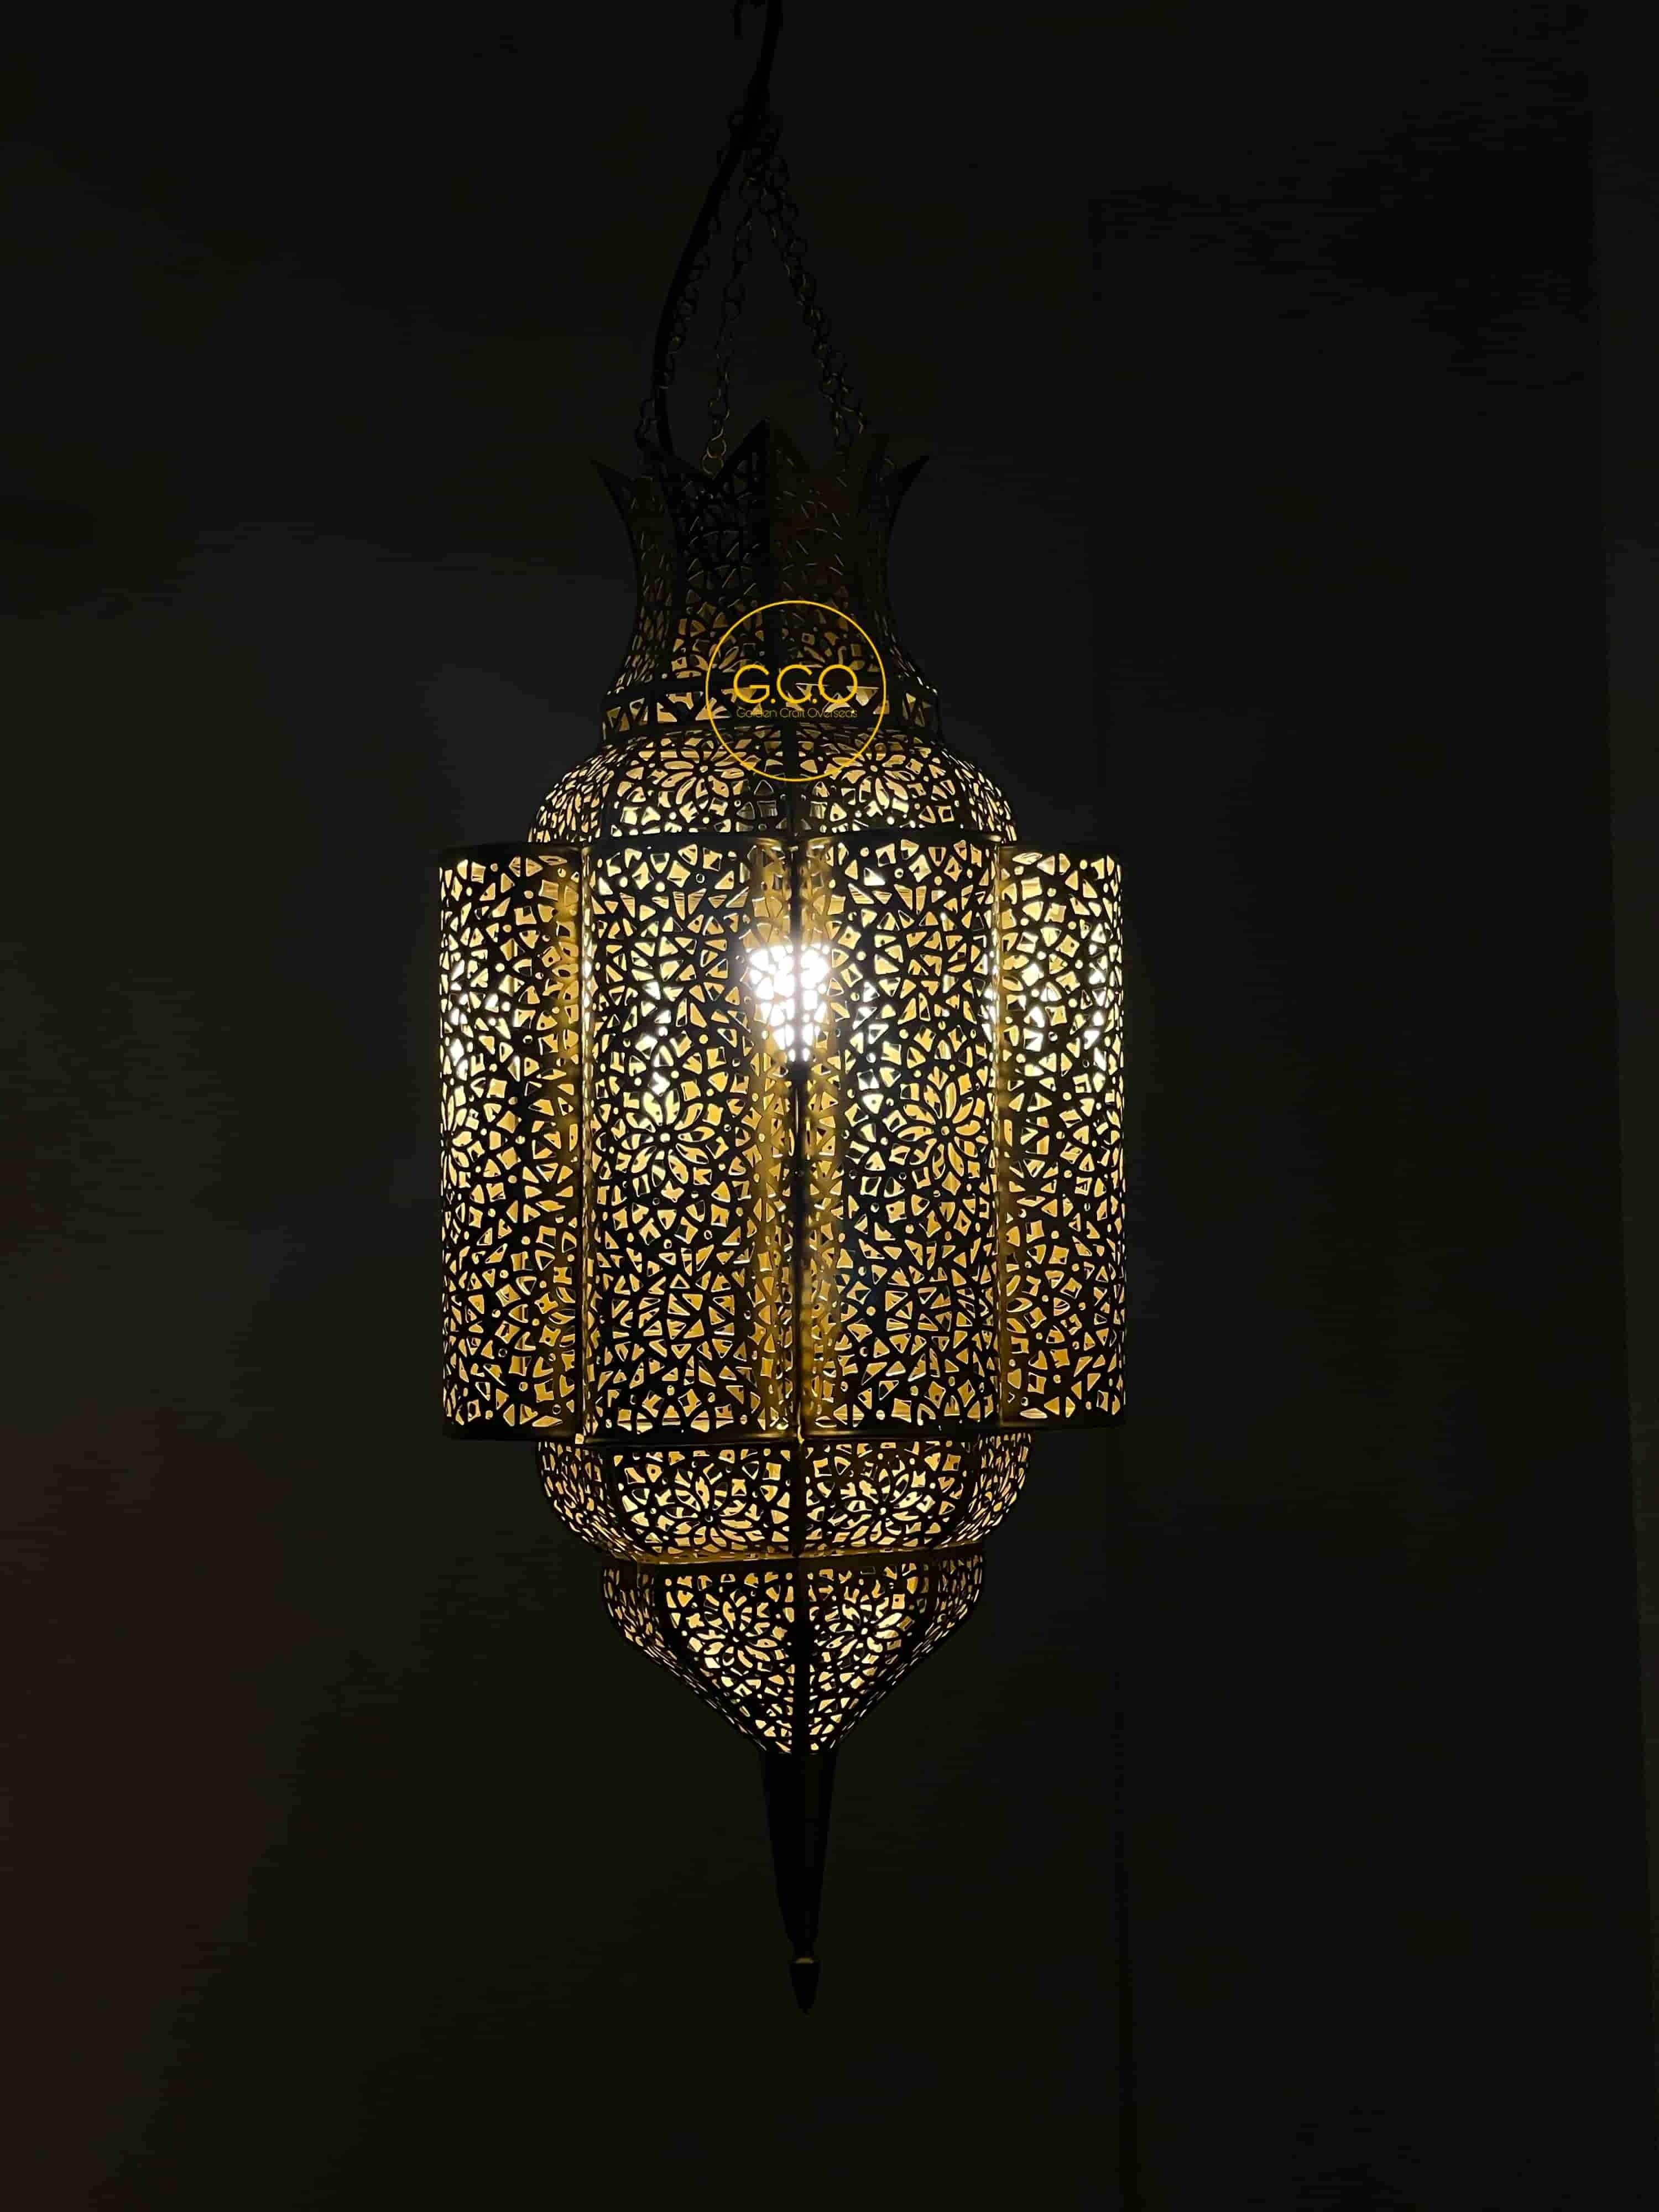 BIg Size Moroccan Hanging Pendant Lamp in iron with powder coated finish